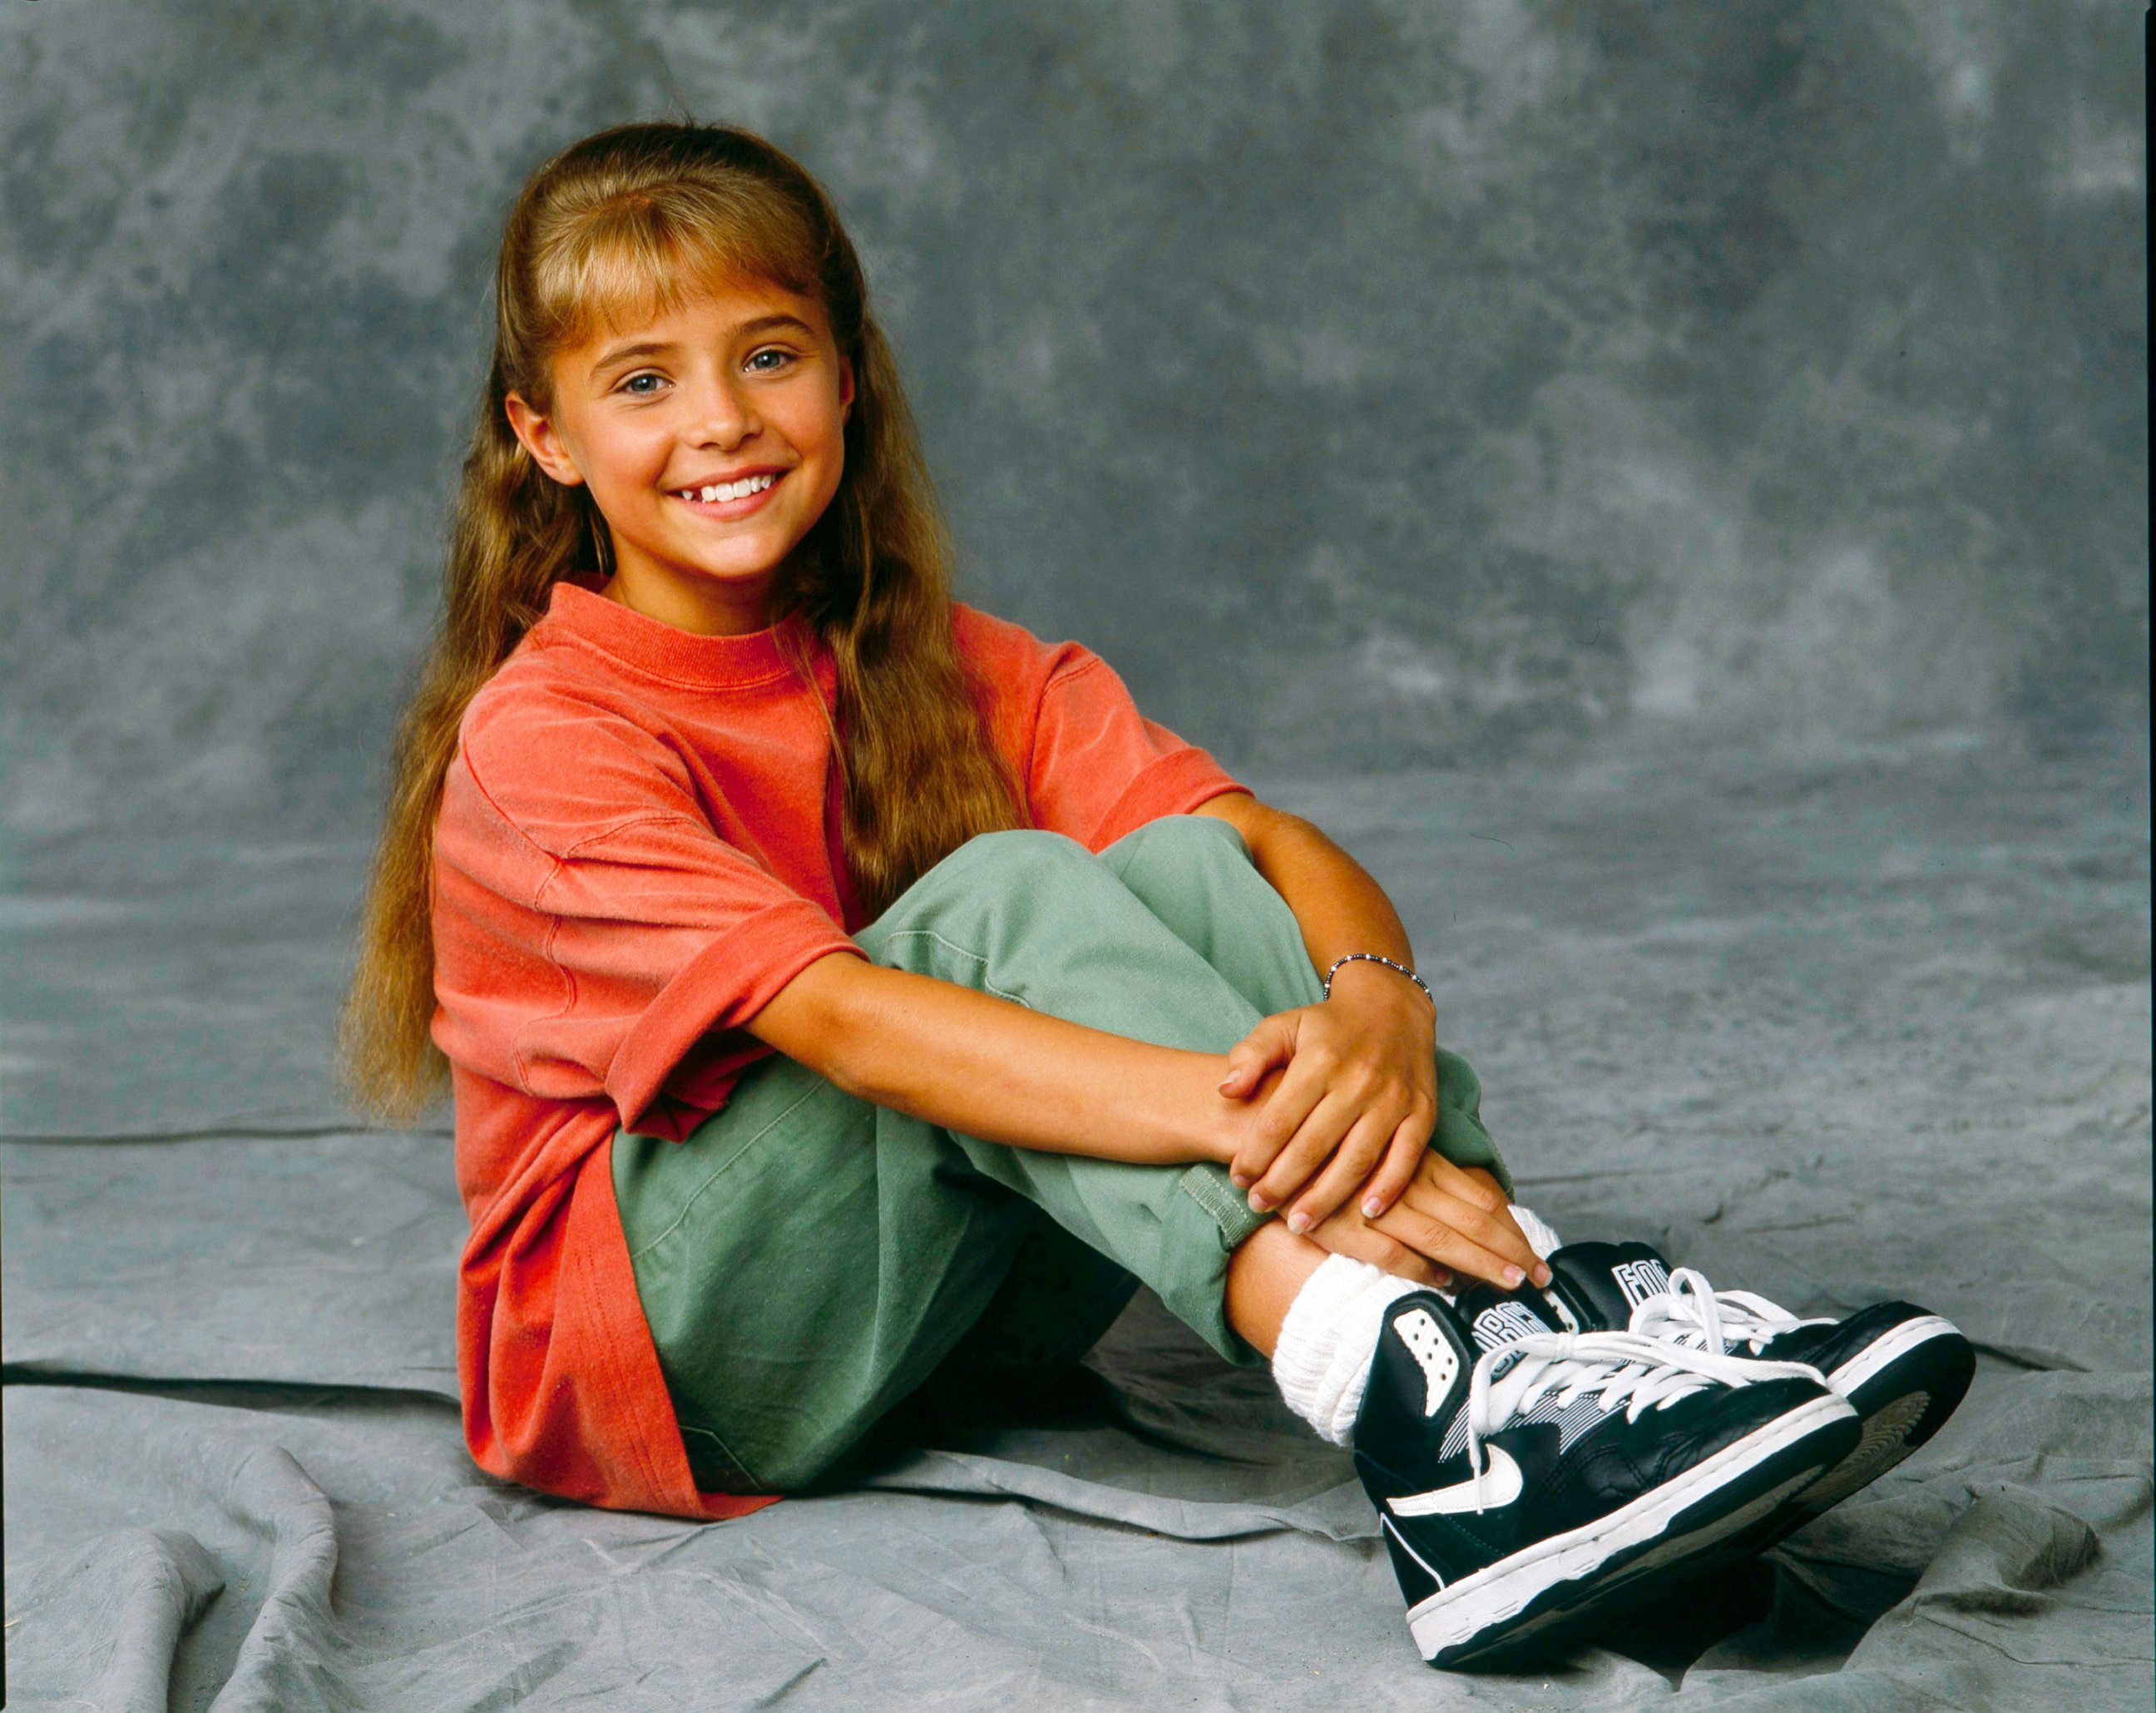 Step by Step' star Christine Lakin reveals what she learned from TV parents